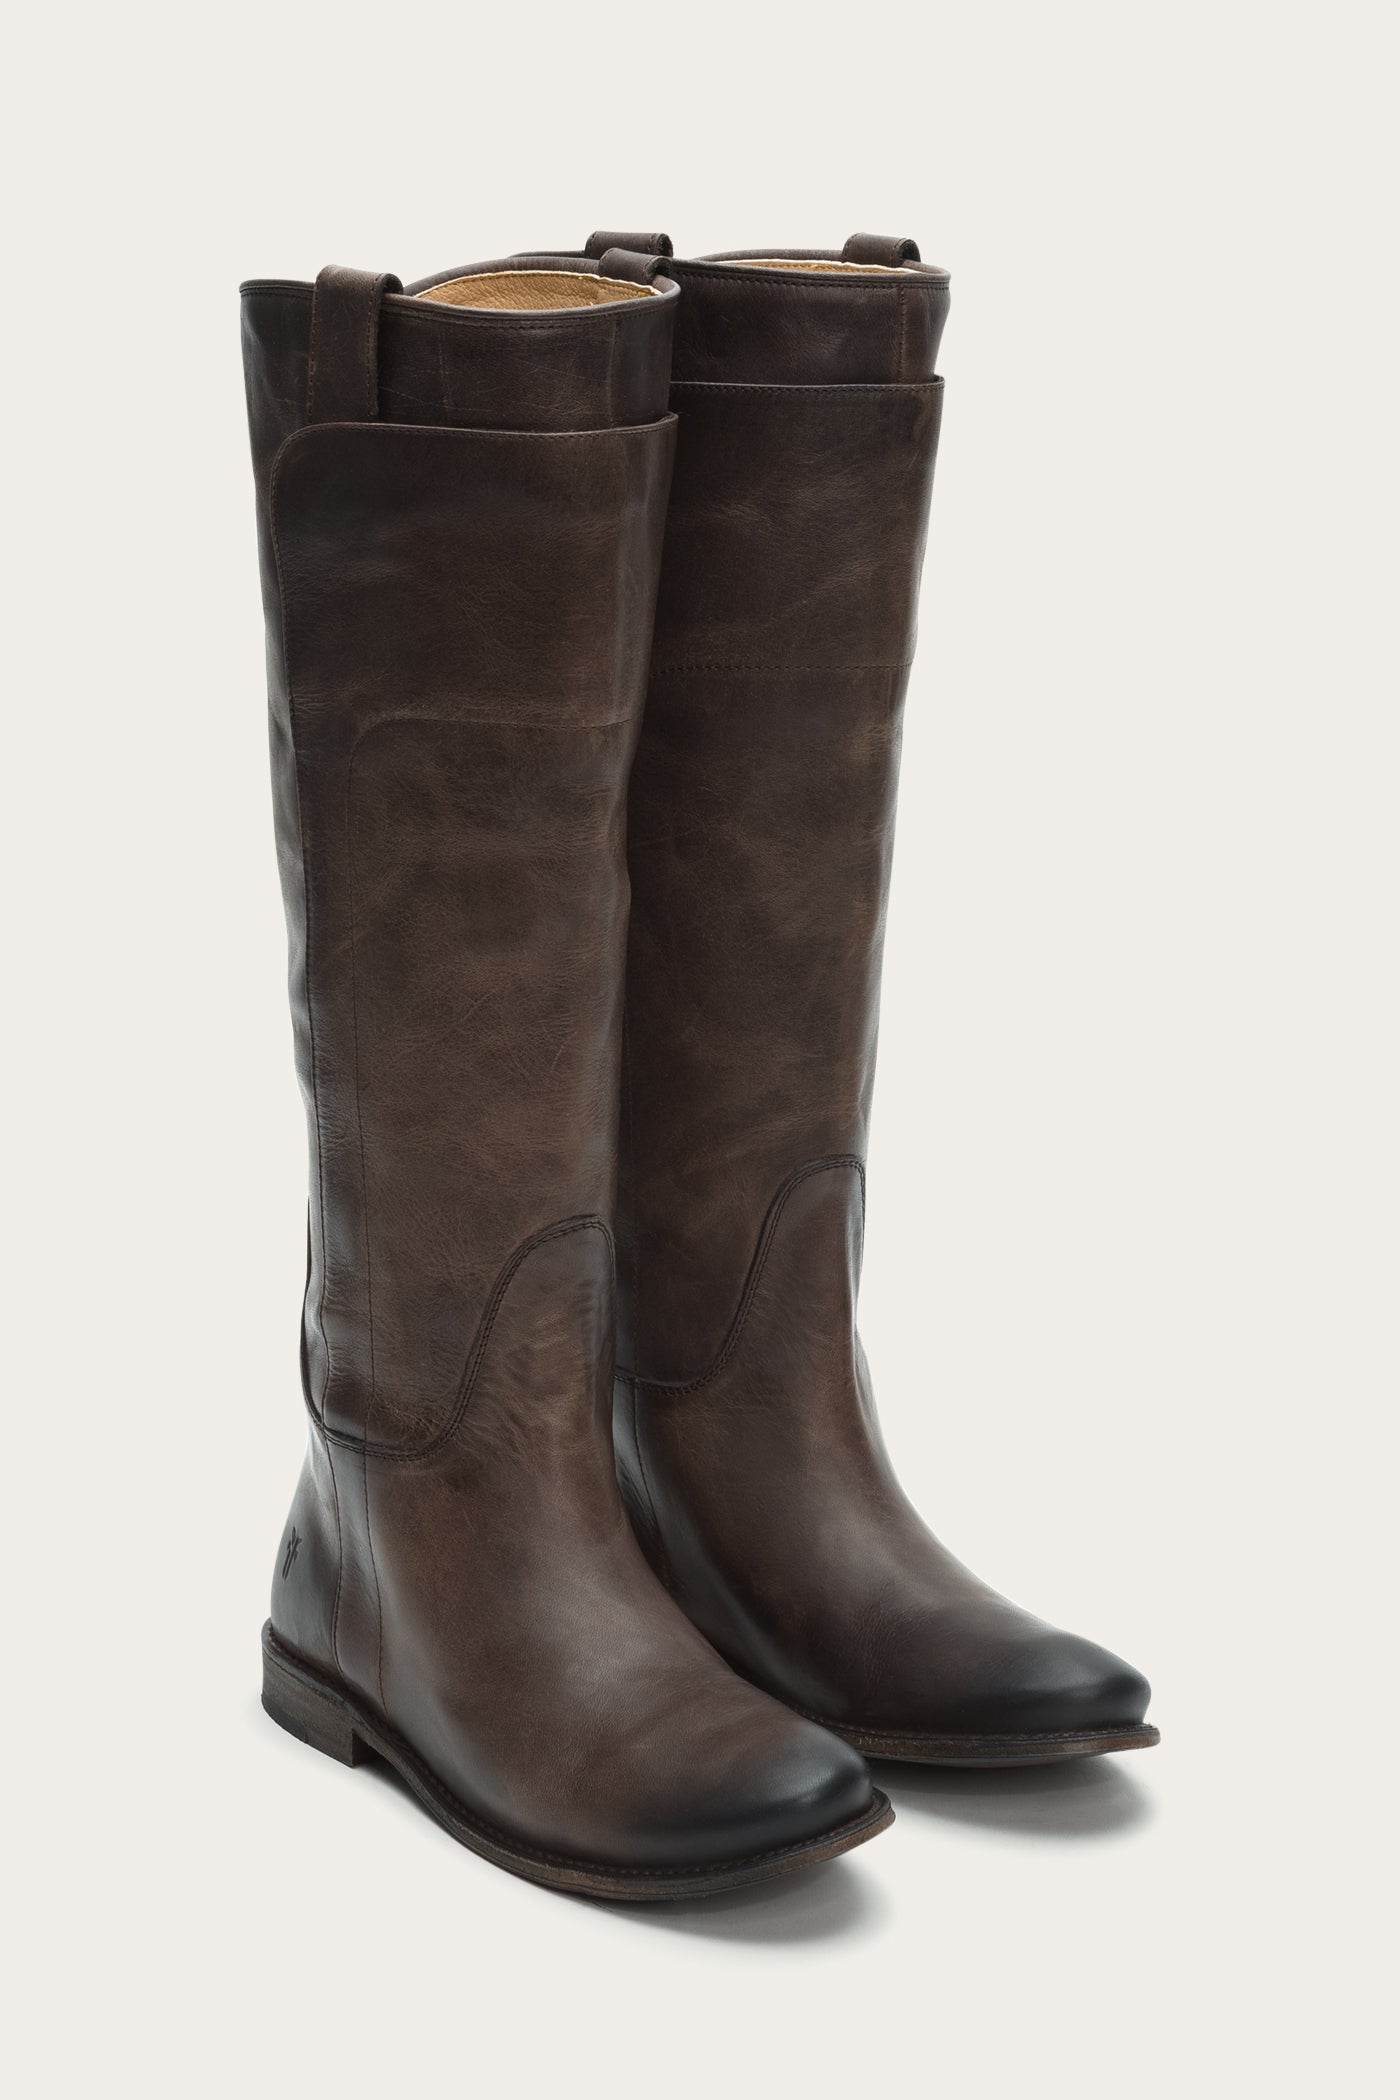 Paige Tall Riding | FRYE Since 1863